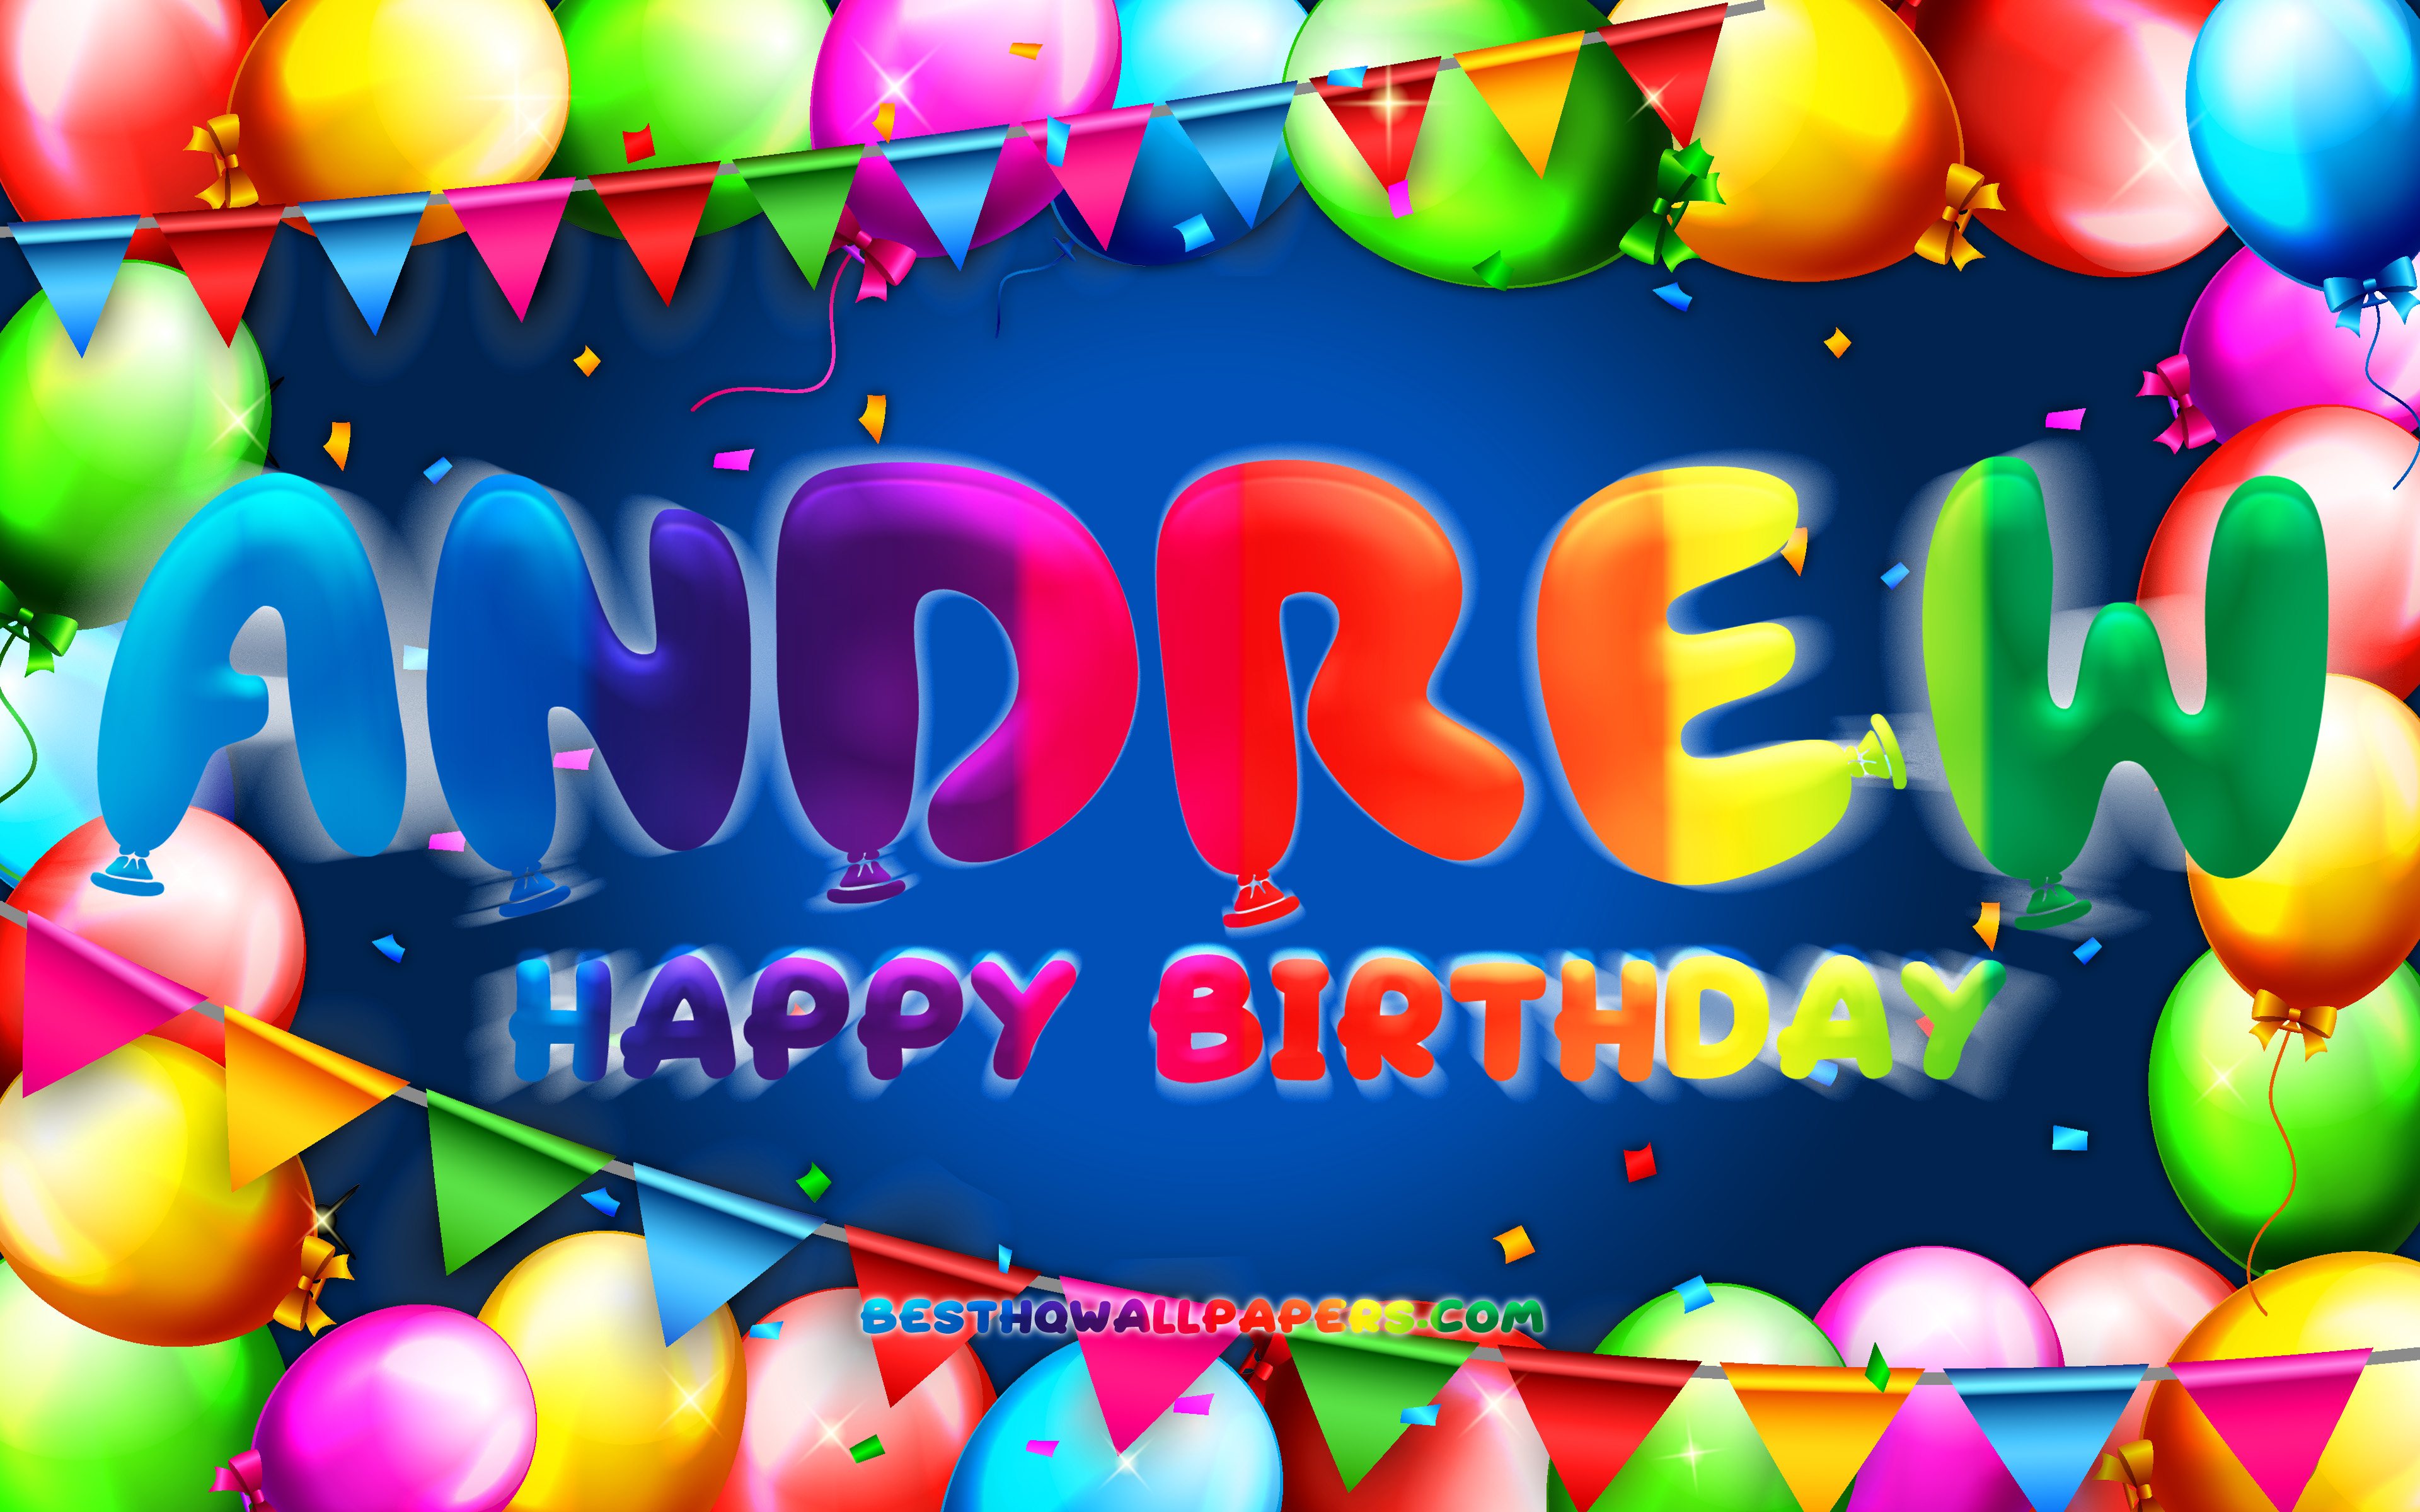 Download wallpapers Happy Birthday Andrew, 4k, colorful balloon frame ...